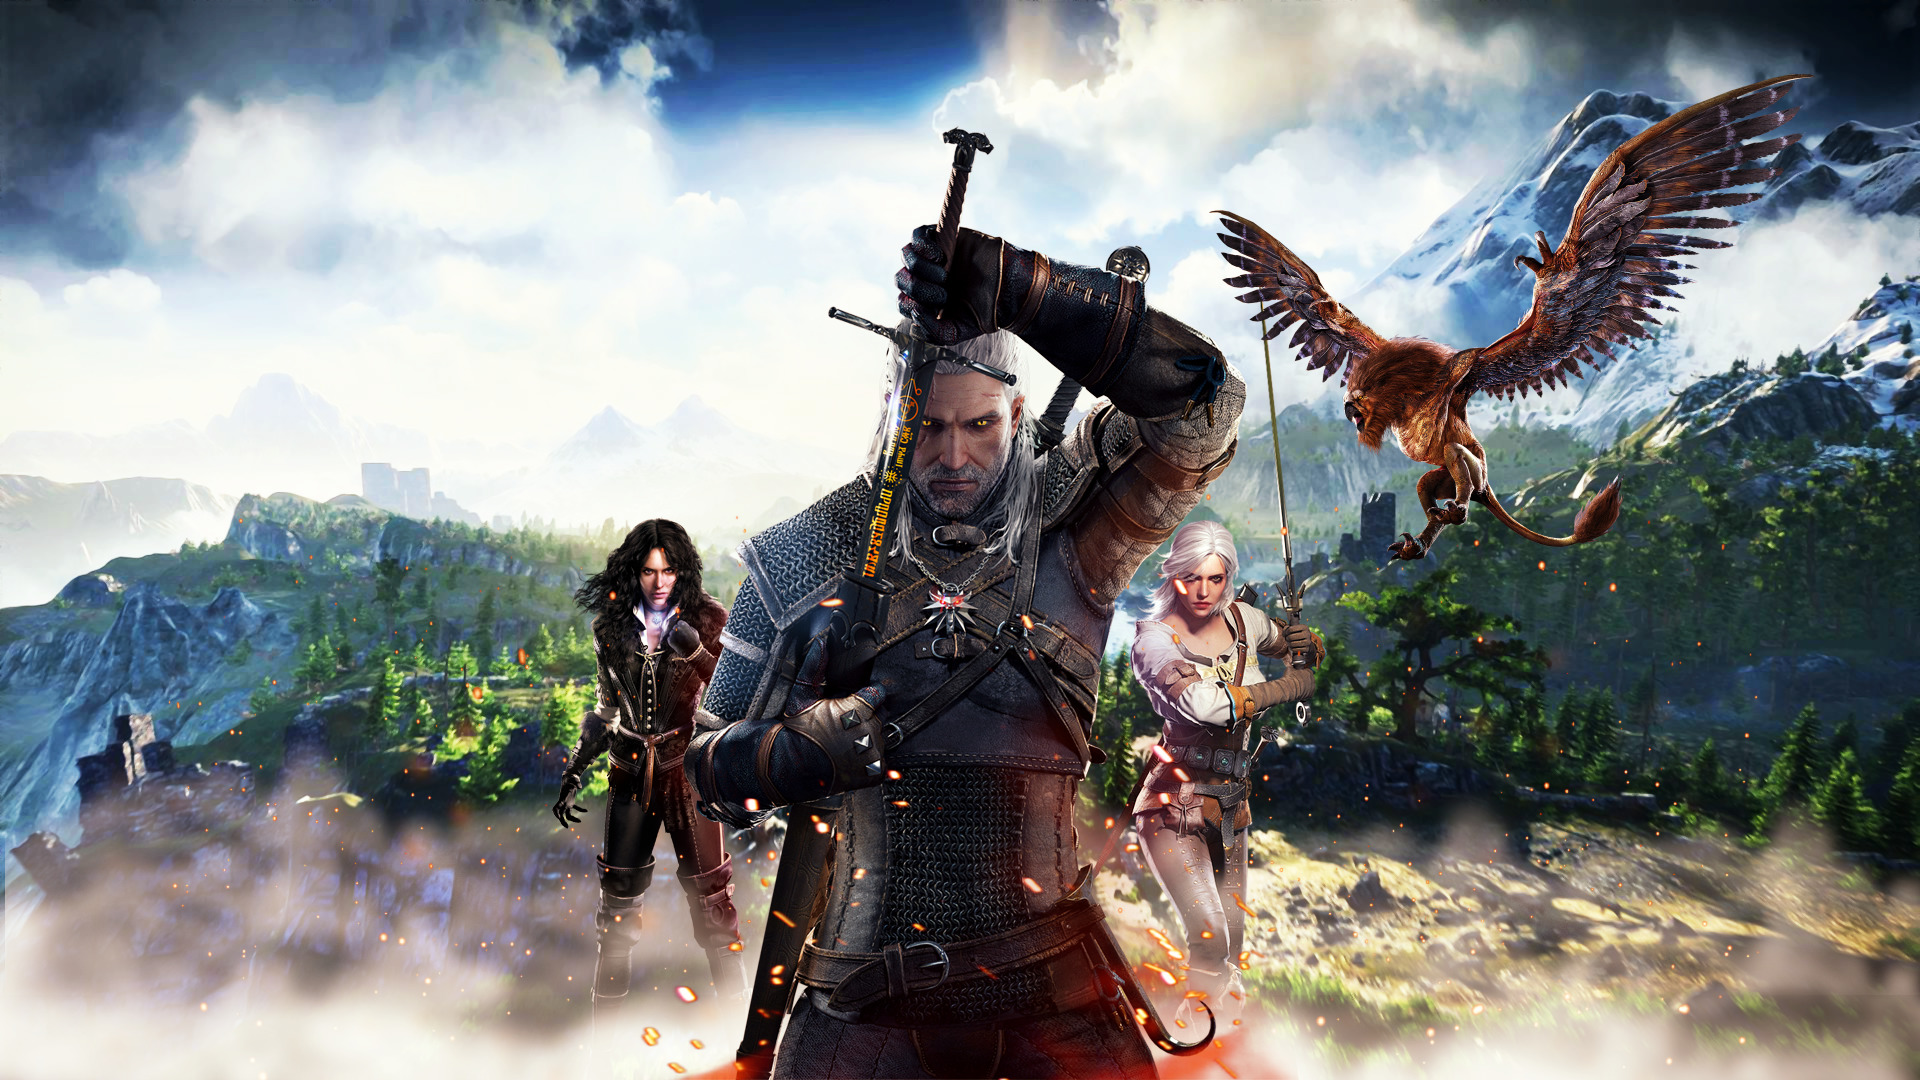 1080p The Witcher 3 Wild Hunt - HD Wallpaper 